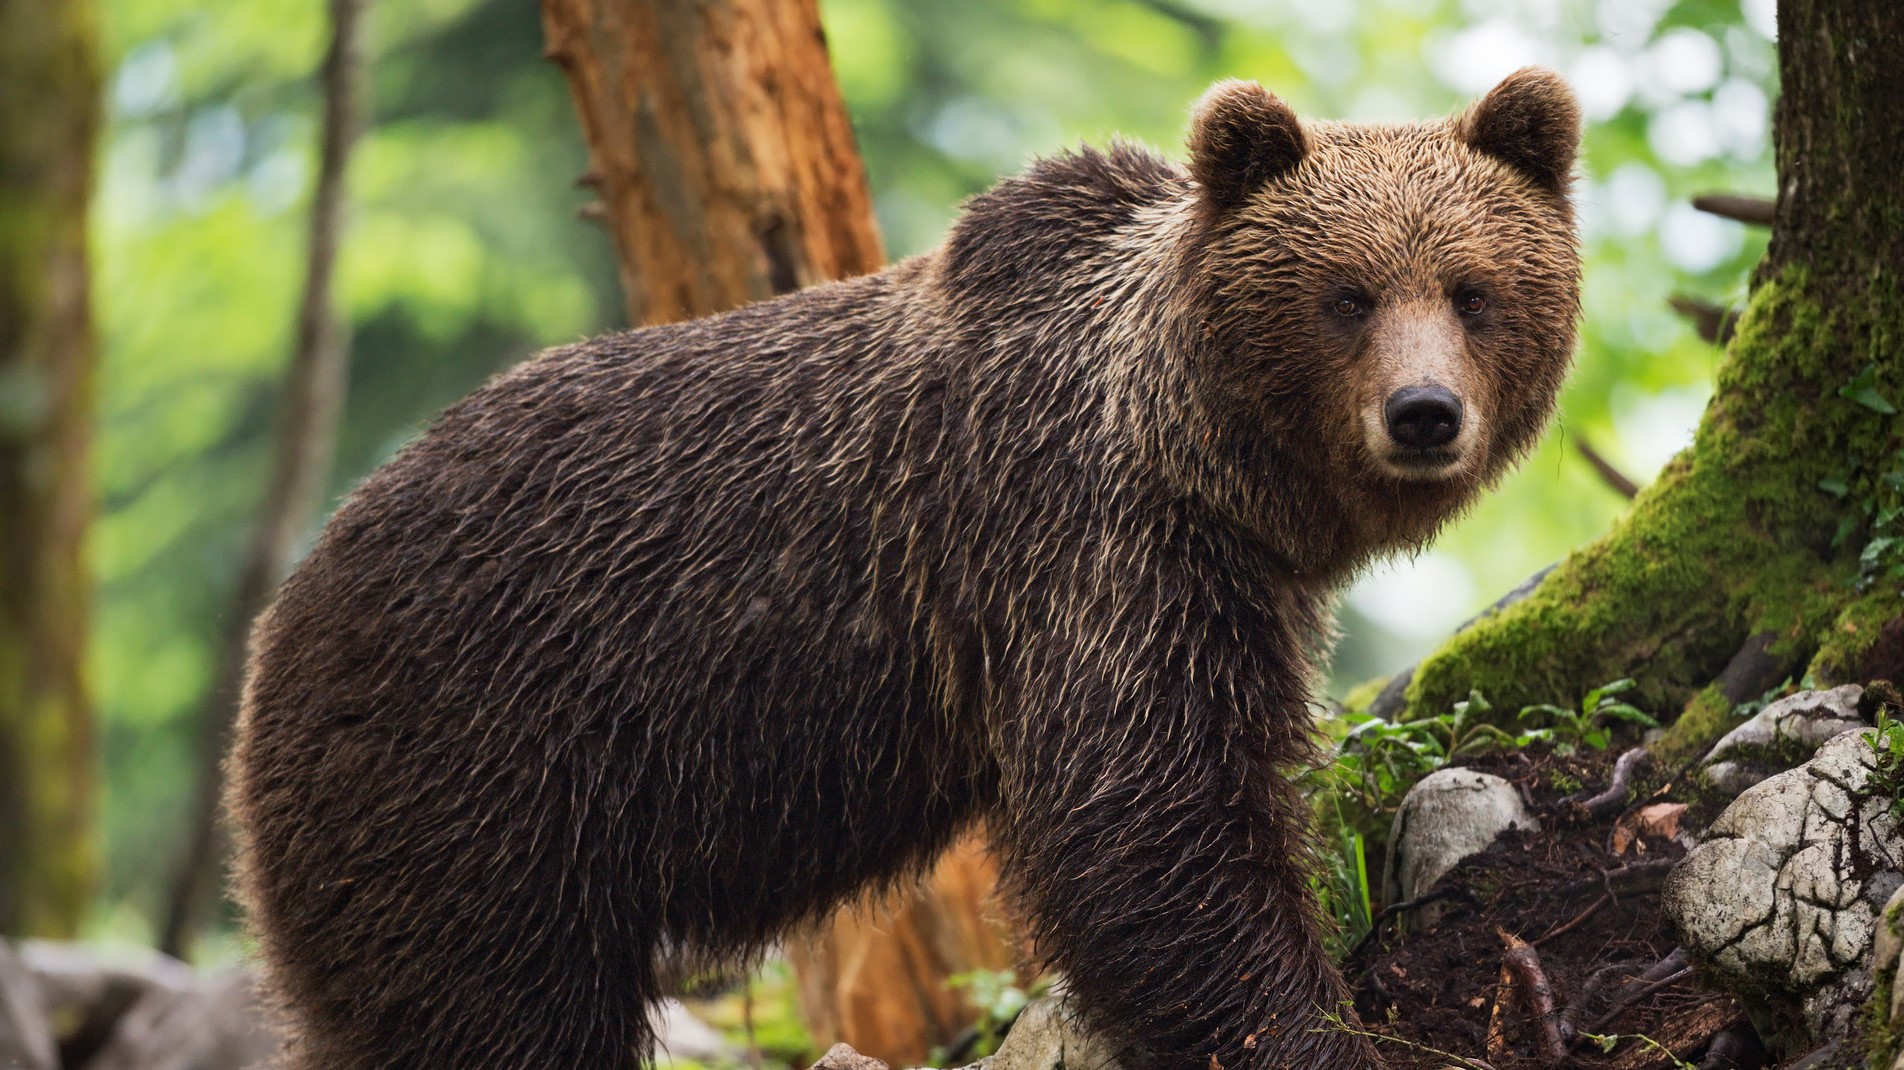 These are the 7 best National Parks for bear sightings | Advnture